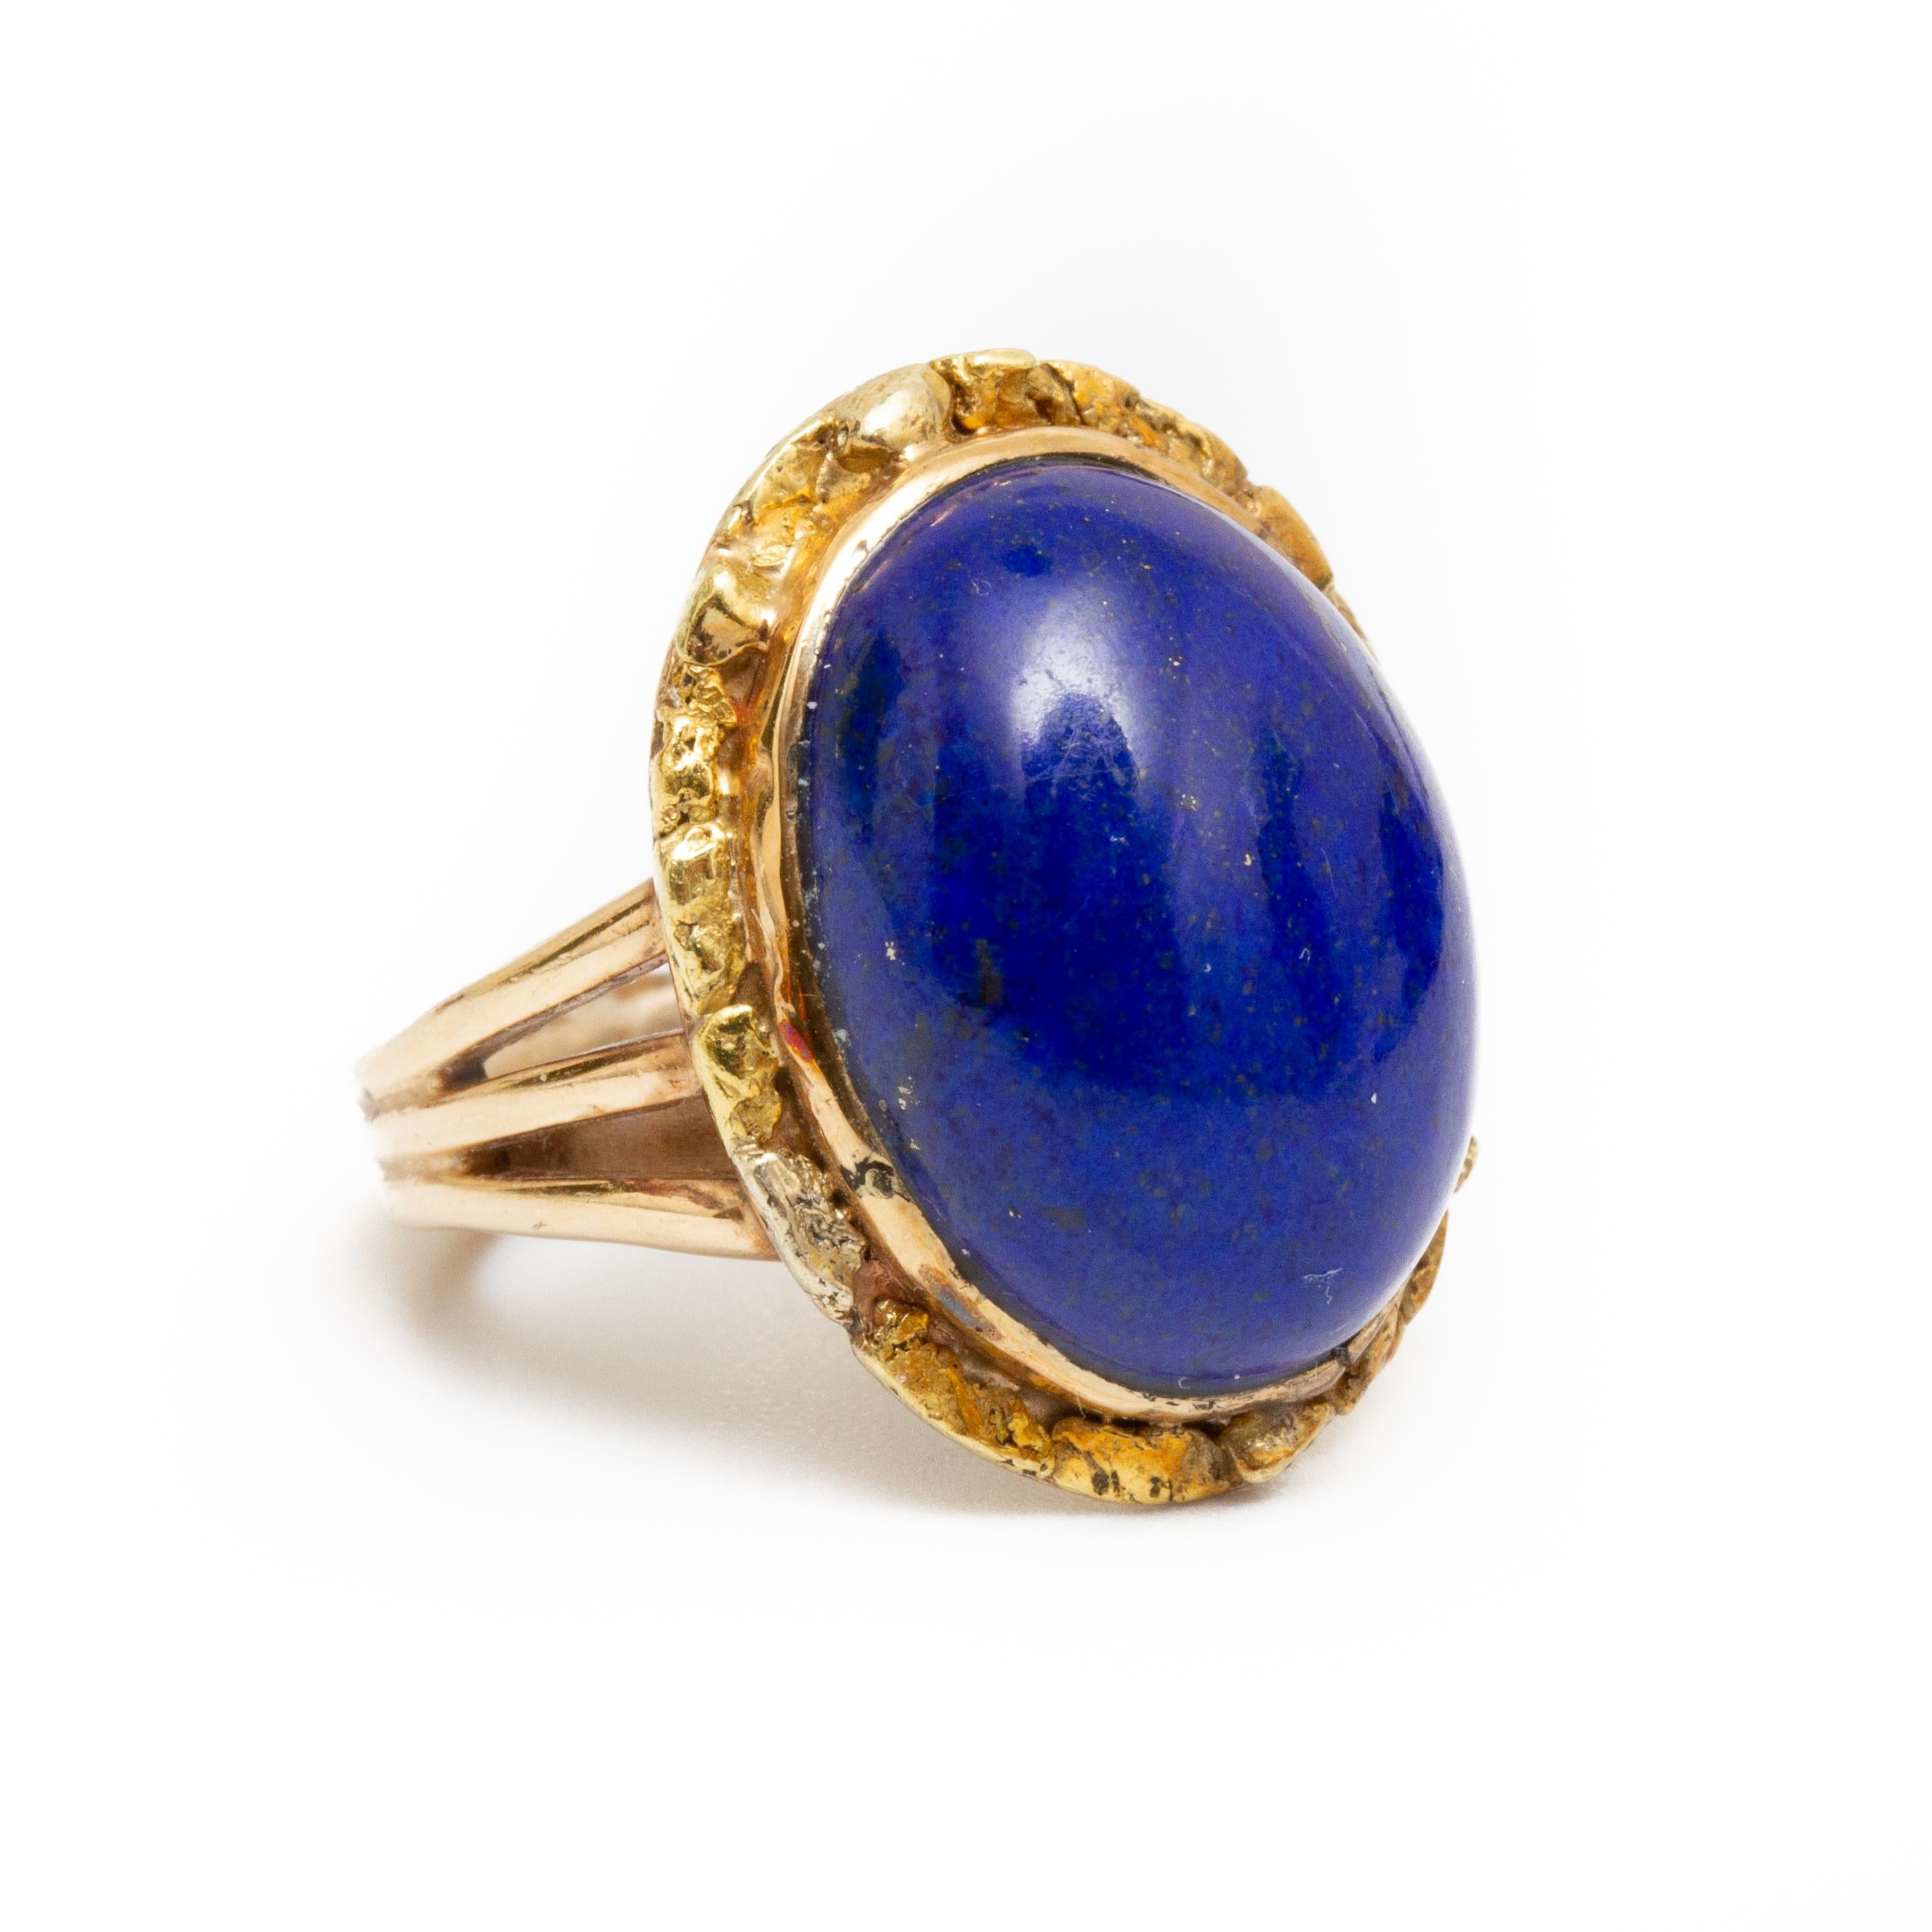 18k gold and lapis lazuli ring size 7. 4.8dwt The ring has a retainer From the Broussard estate noted jewelry collection Park Avenue New York